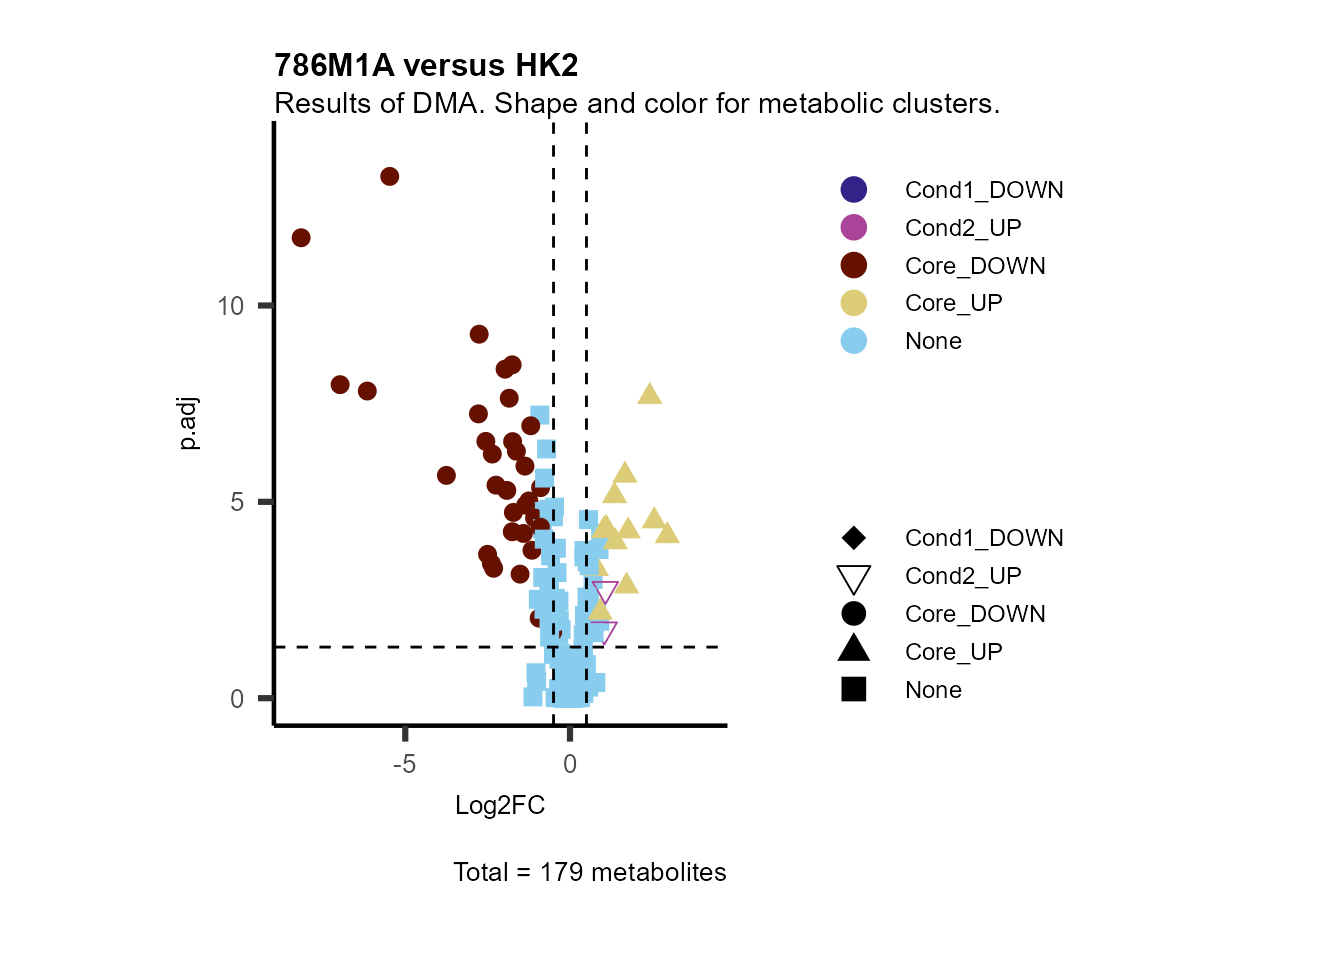 Figure: Standard figure displaying DMA results colour coded/shaped for metabolic clusters from MCA results.